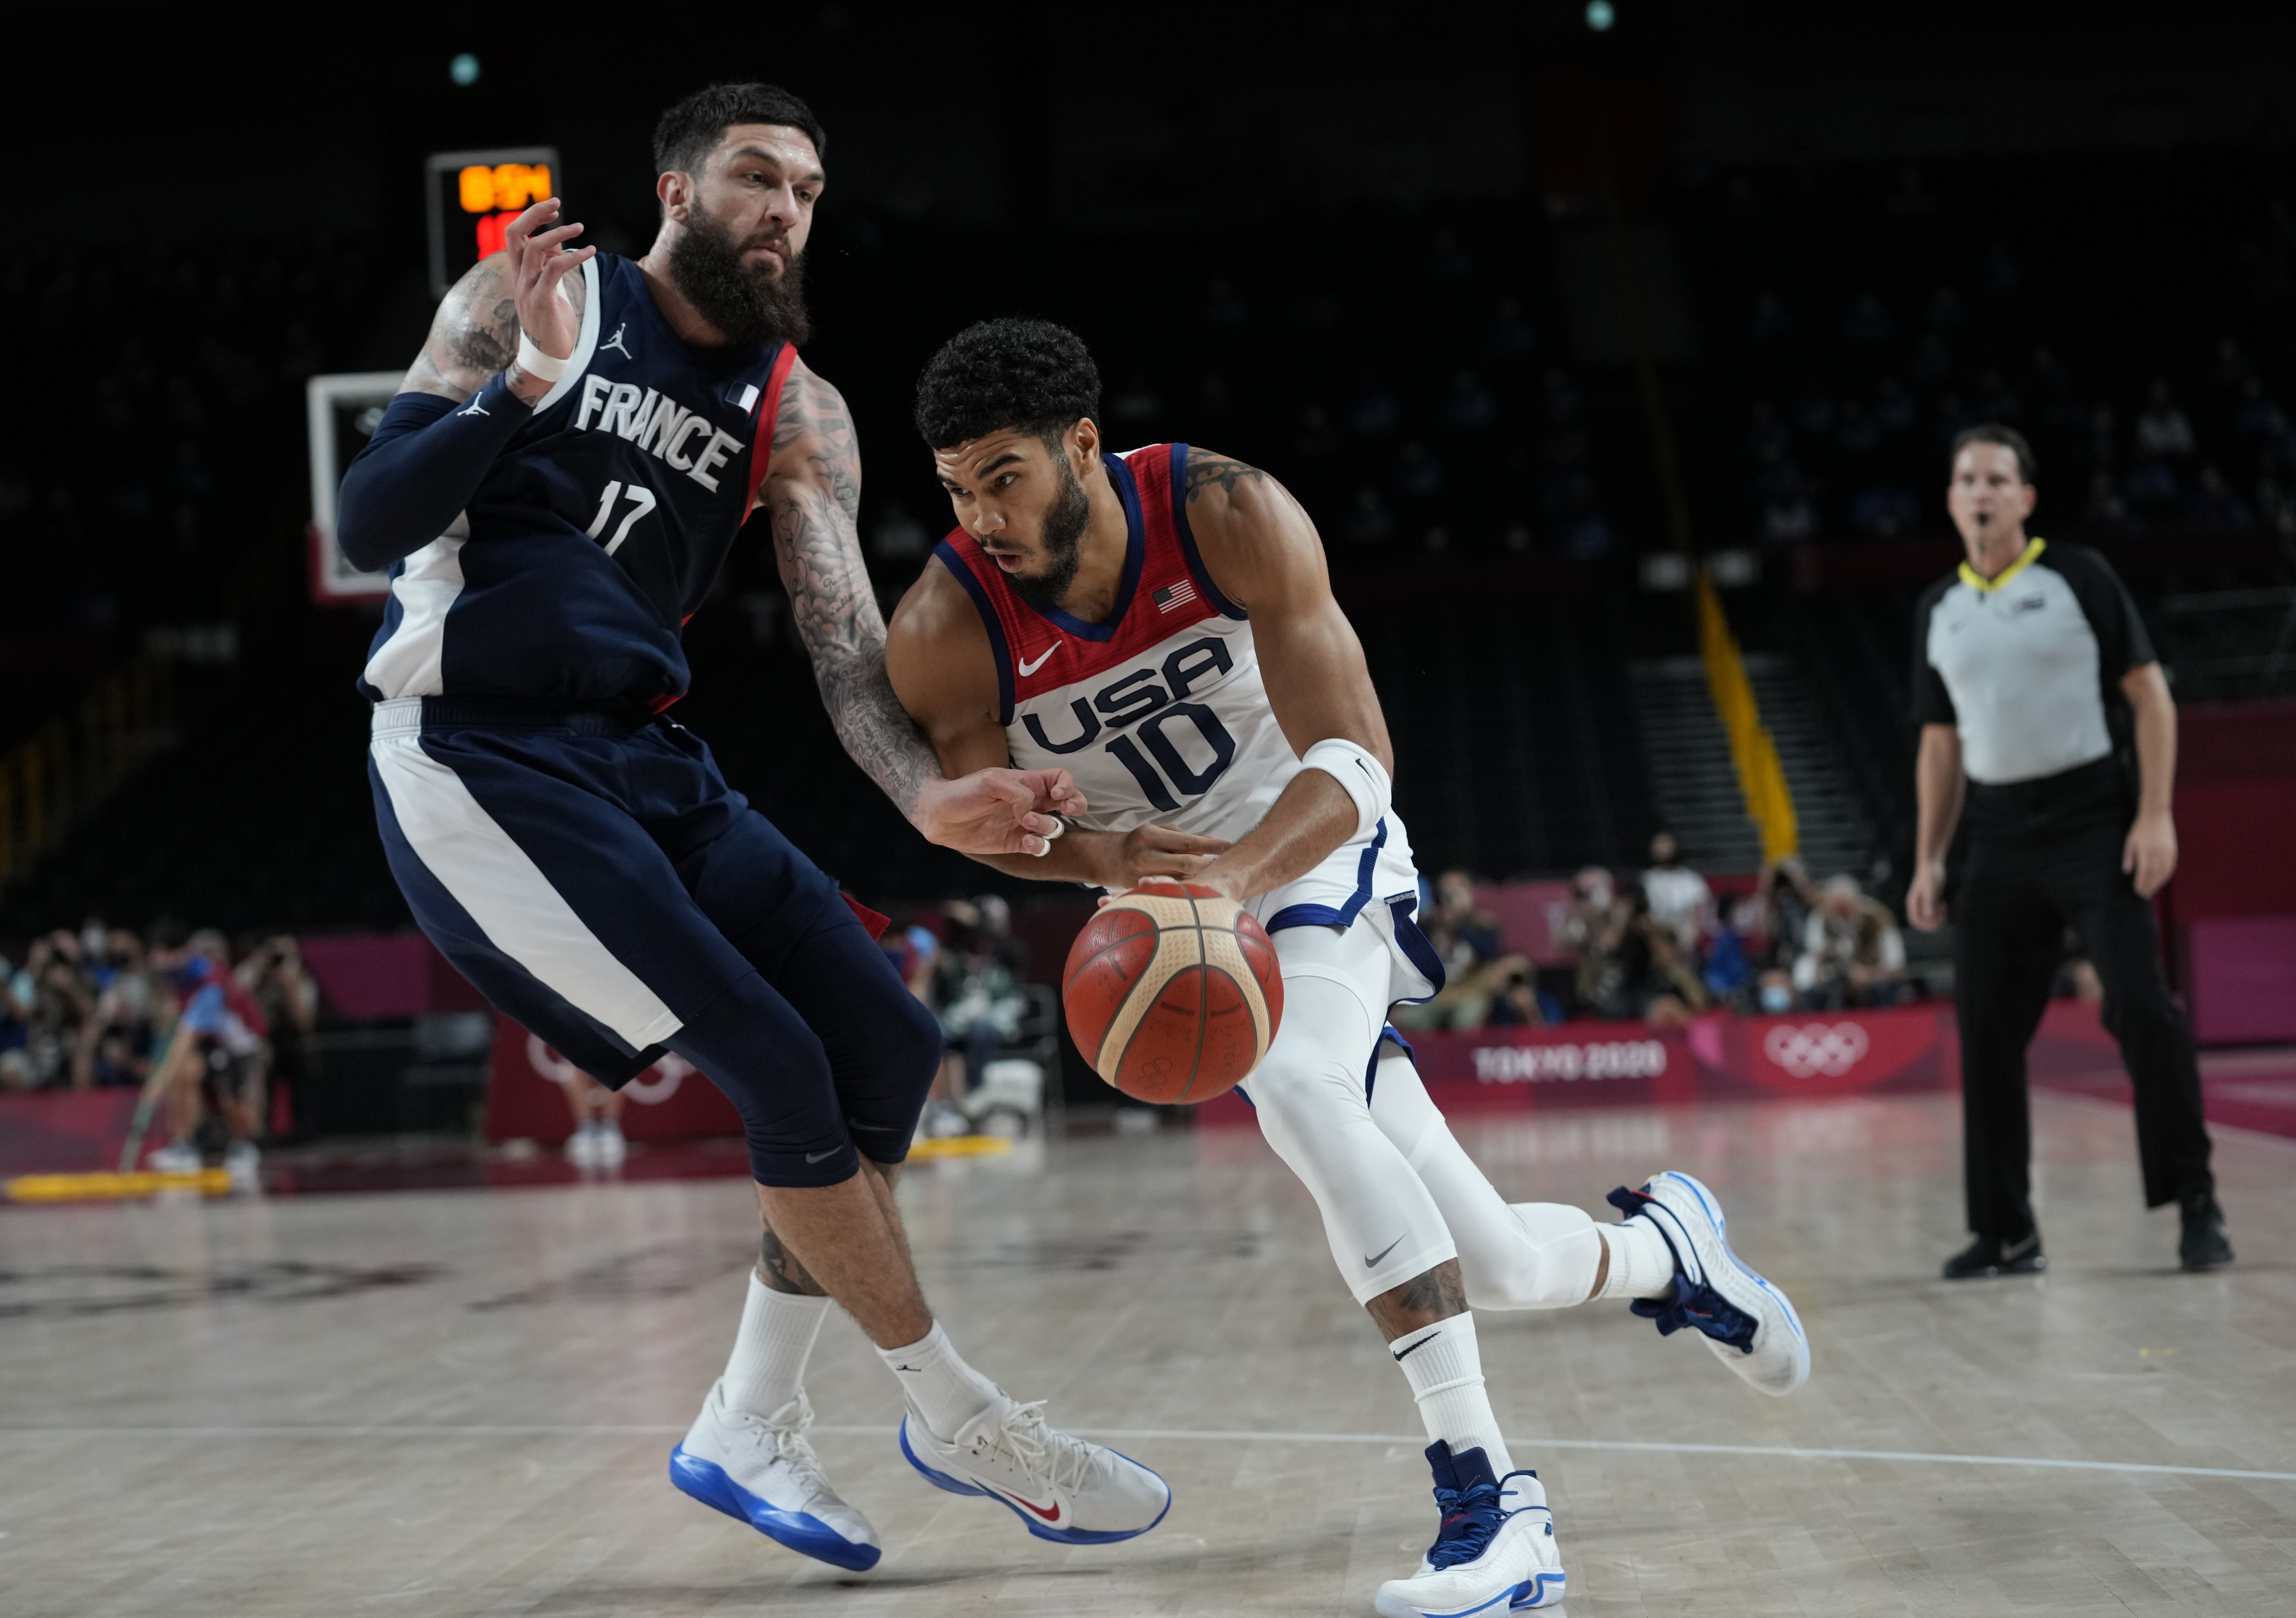 Kevin Durant and Jayson Tatum Lead Team U.S.A. in Scoring at Half